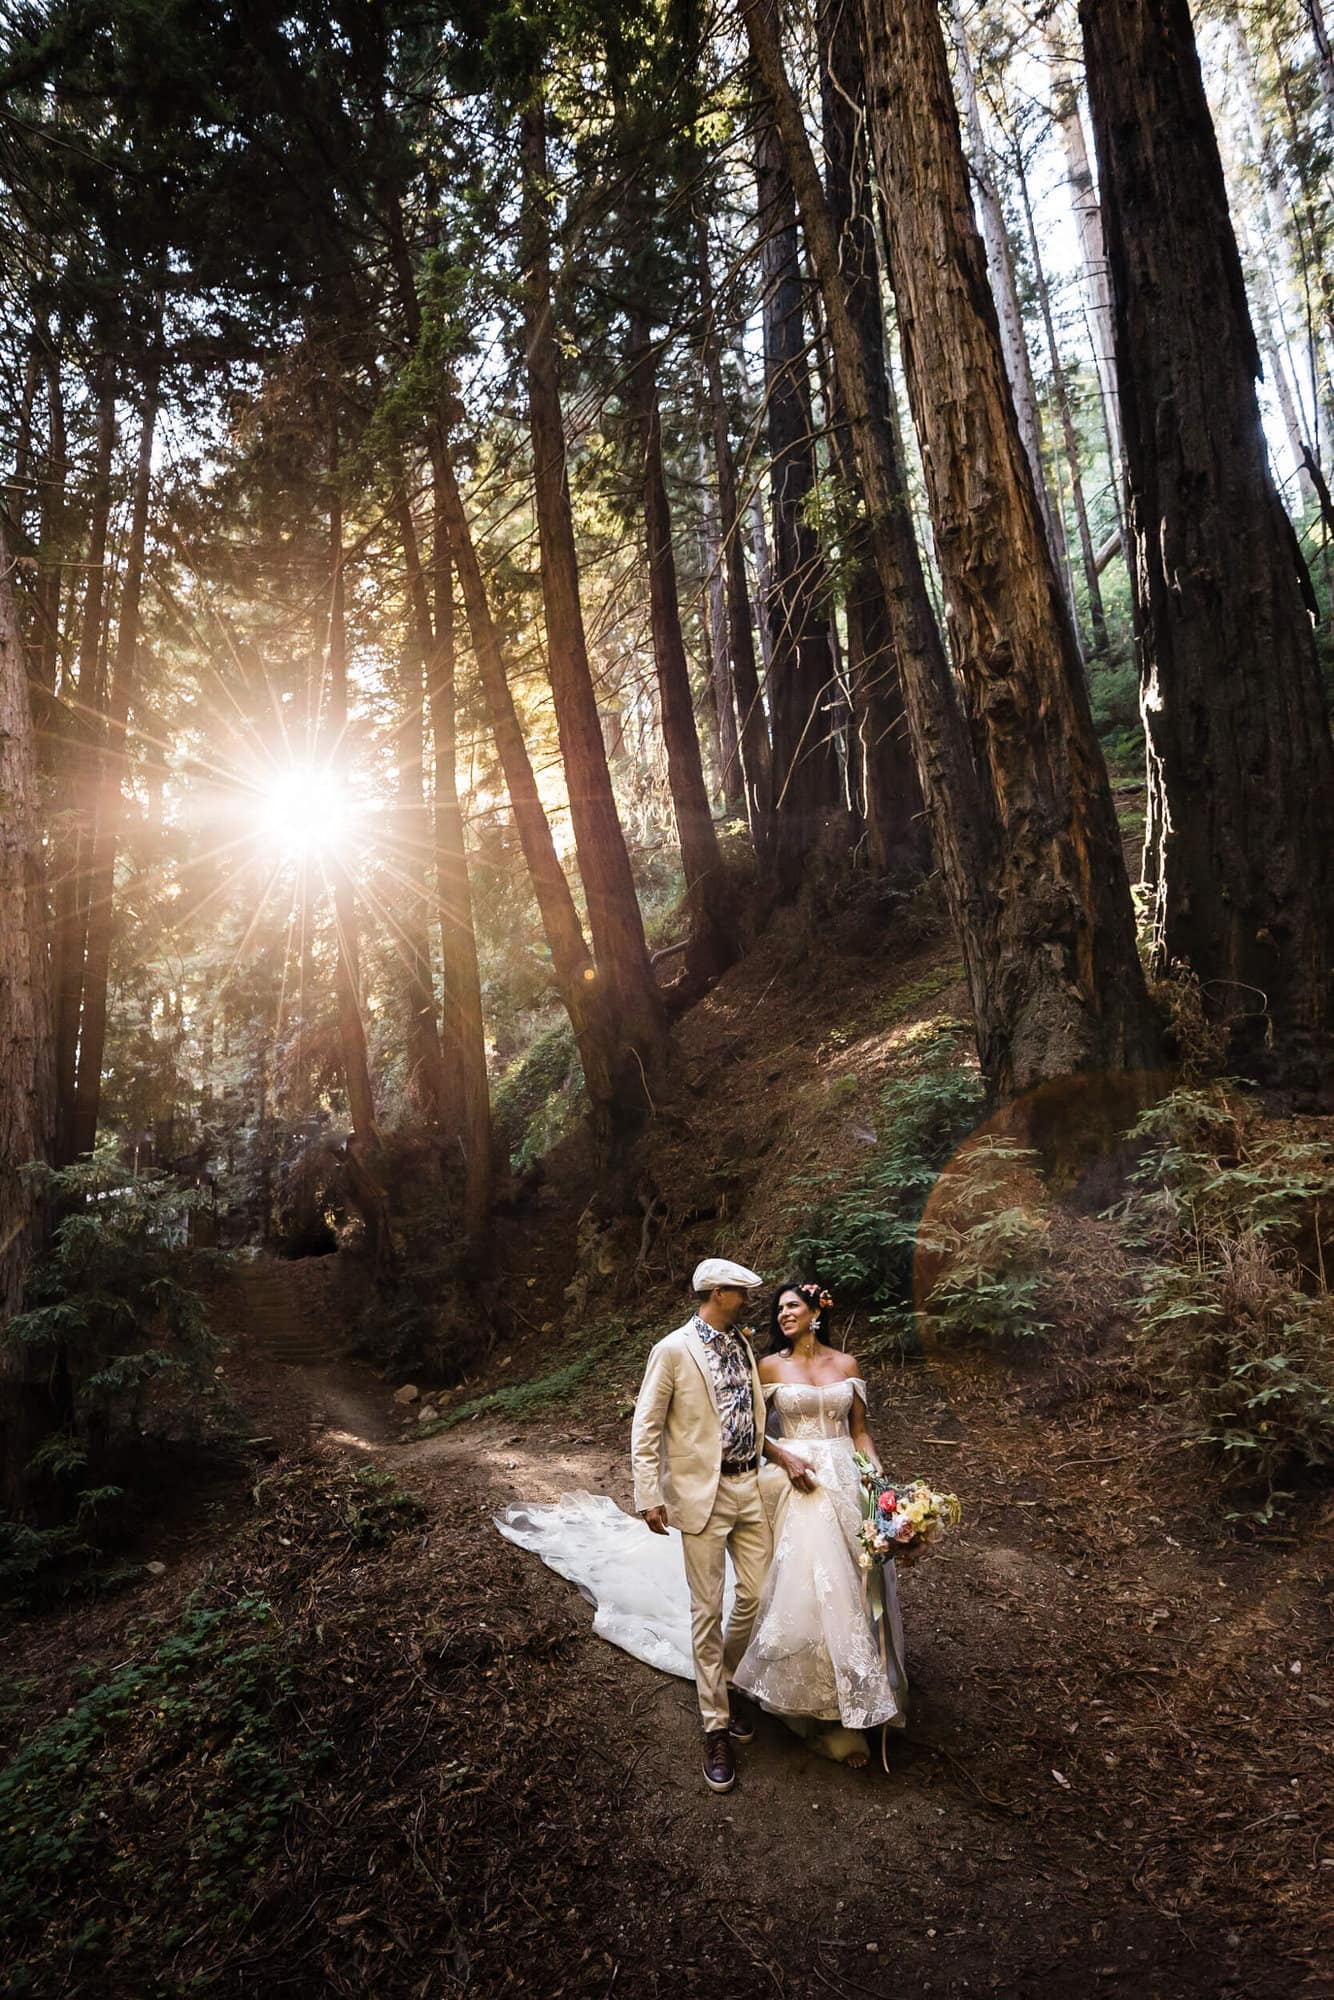 You have to check out these epic places to elope in California! If you are a California fan and want to know where to tie the knot then read this.